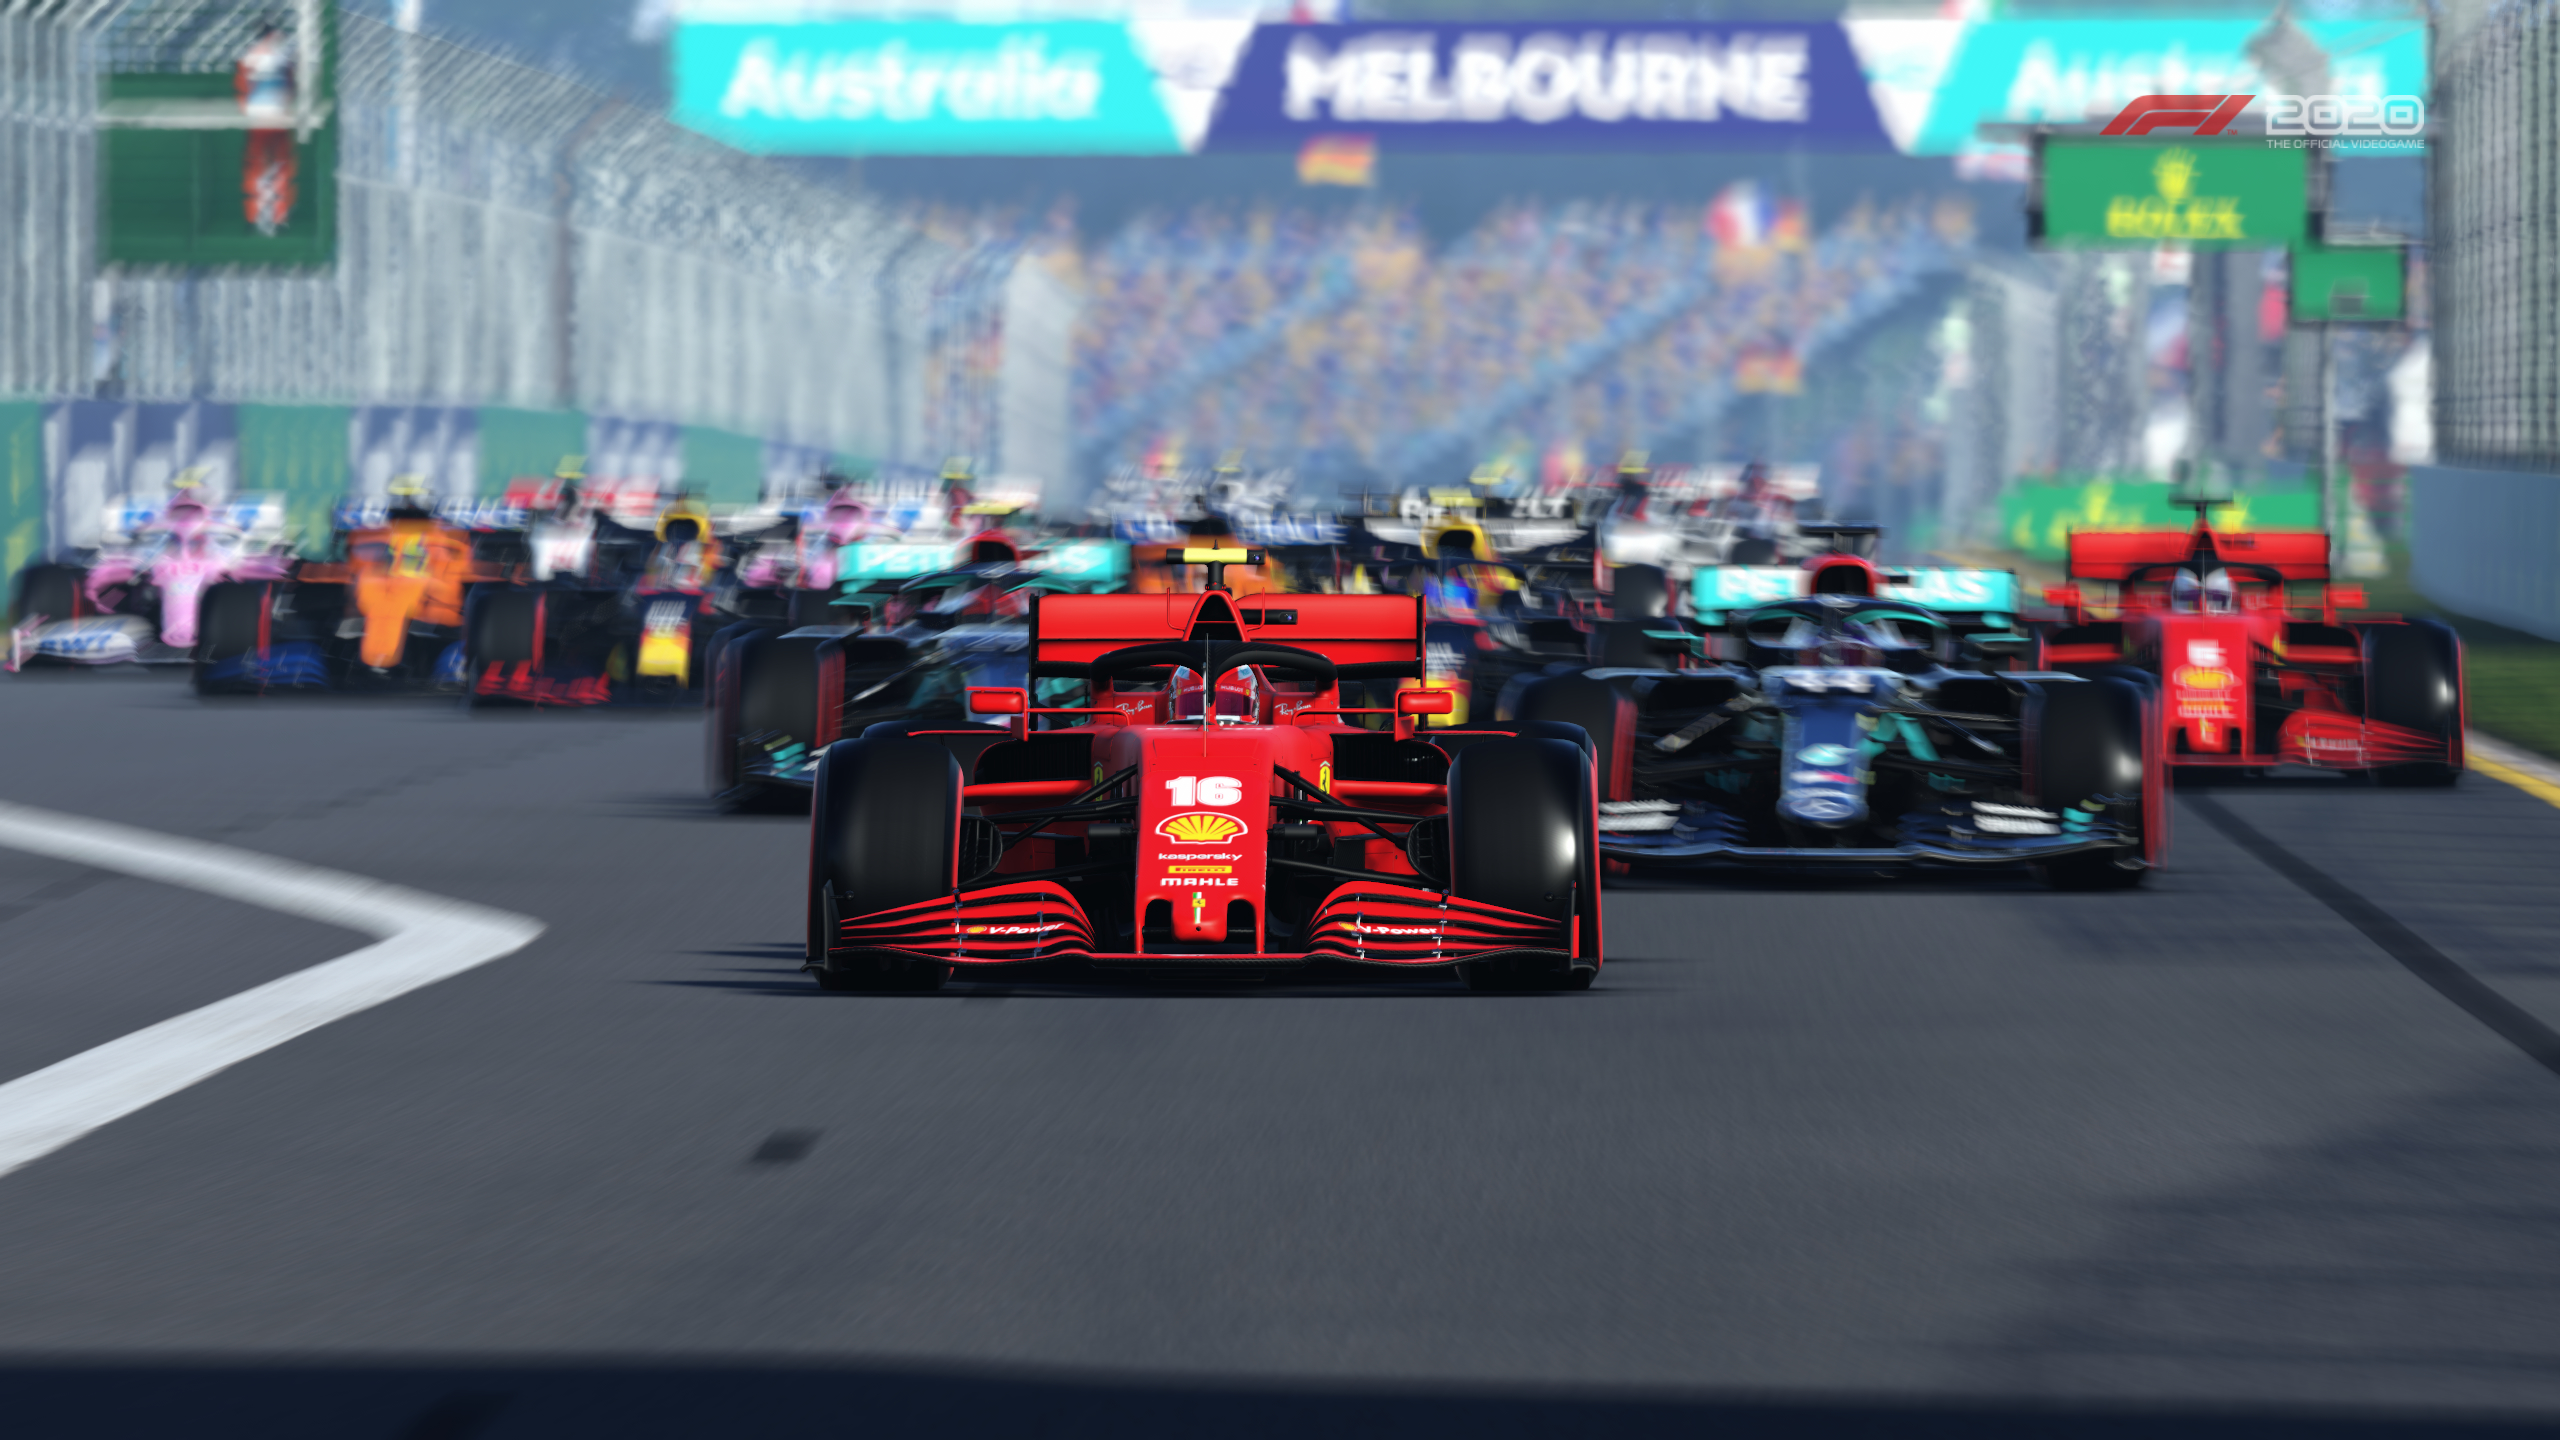 F1 2020 Wallpaper, HD Games 4K Wallpapers, Images, Photos ...